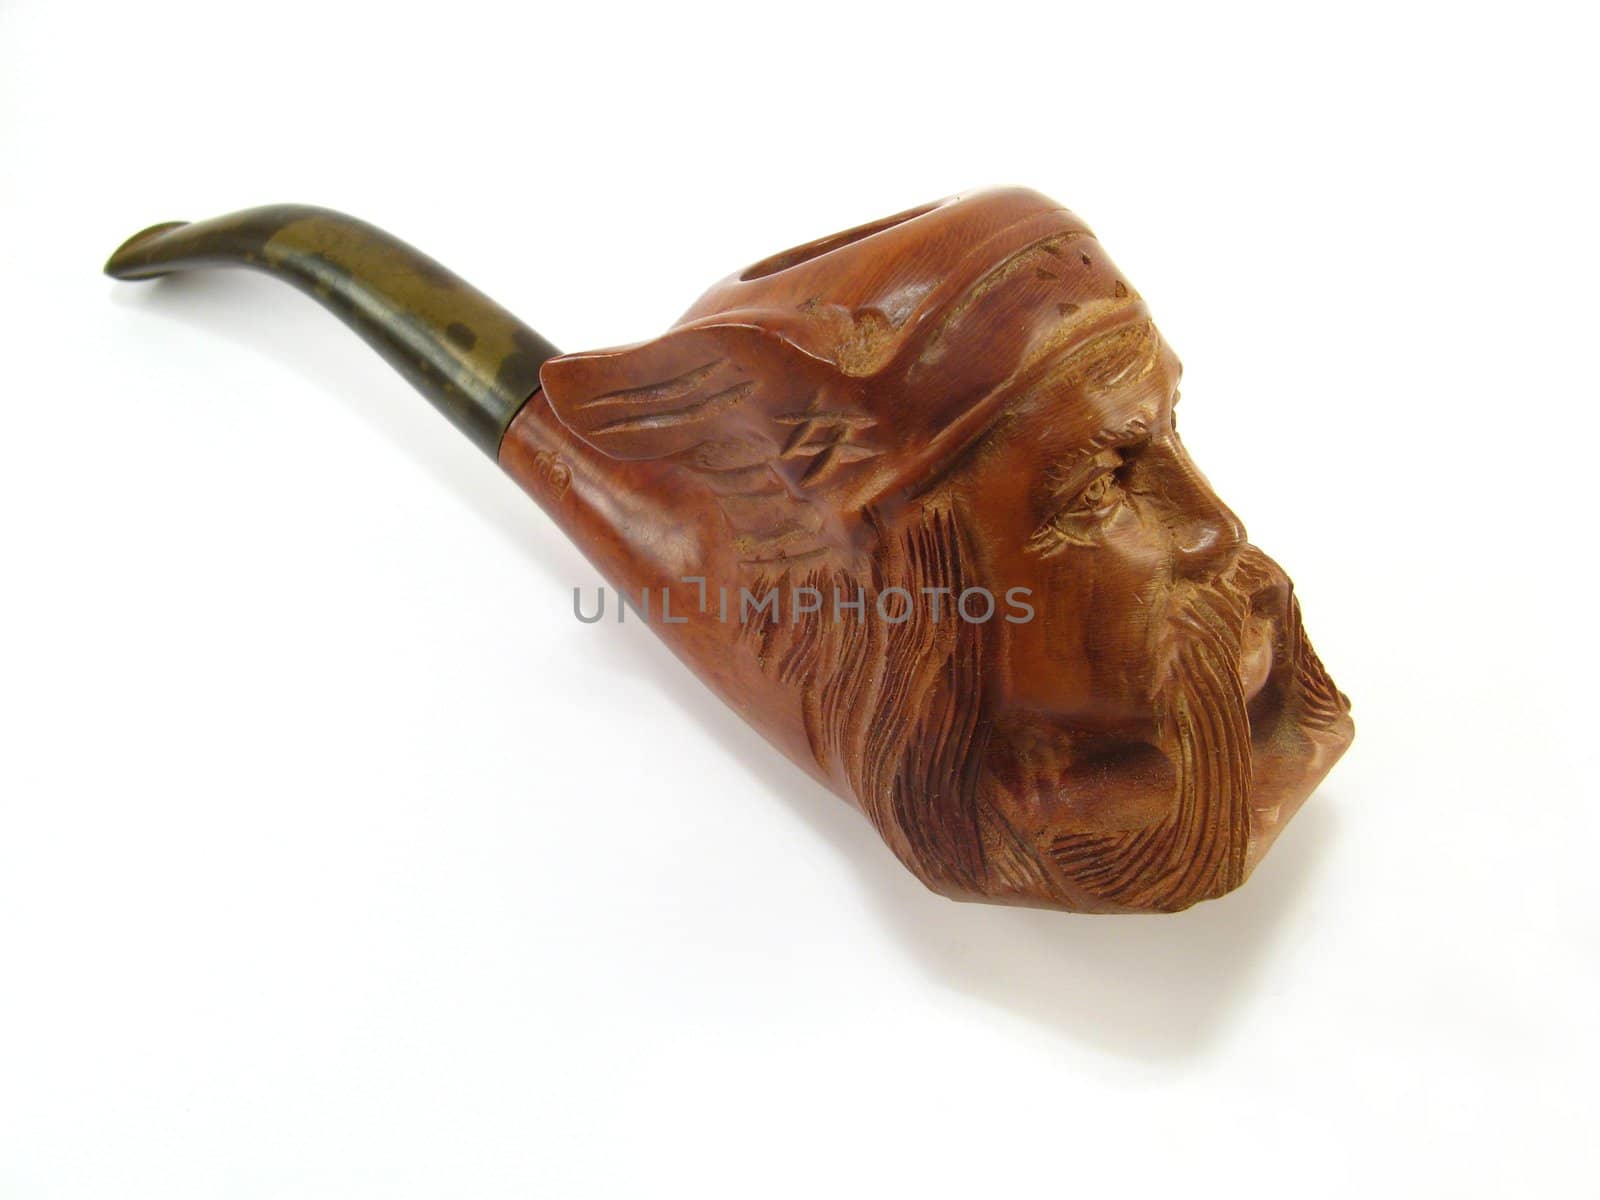 sculptured pipe with a gaul man's head by jbouzou